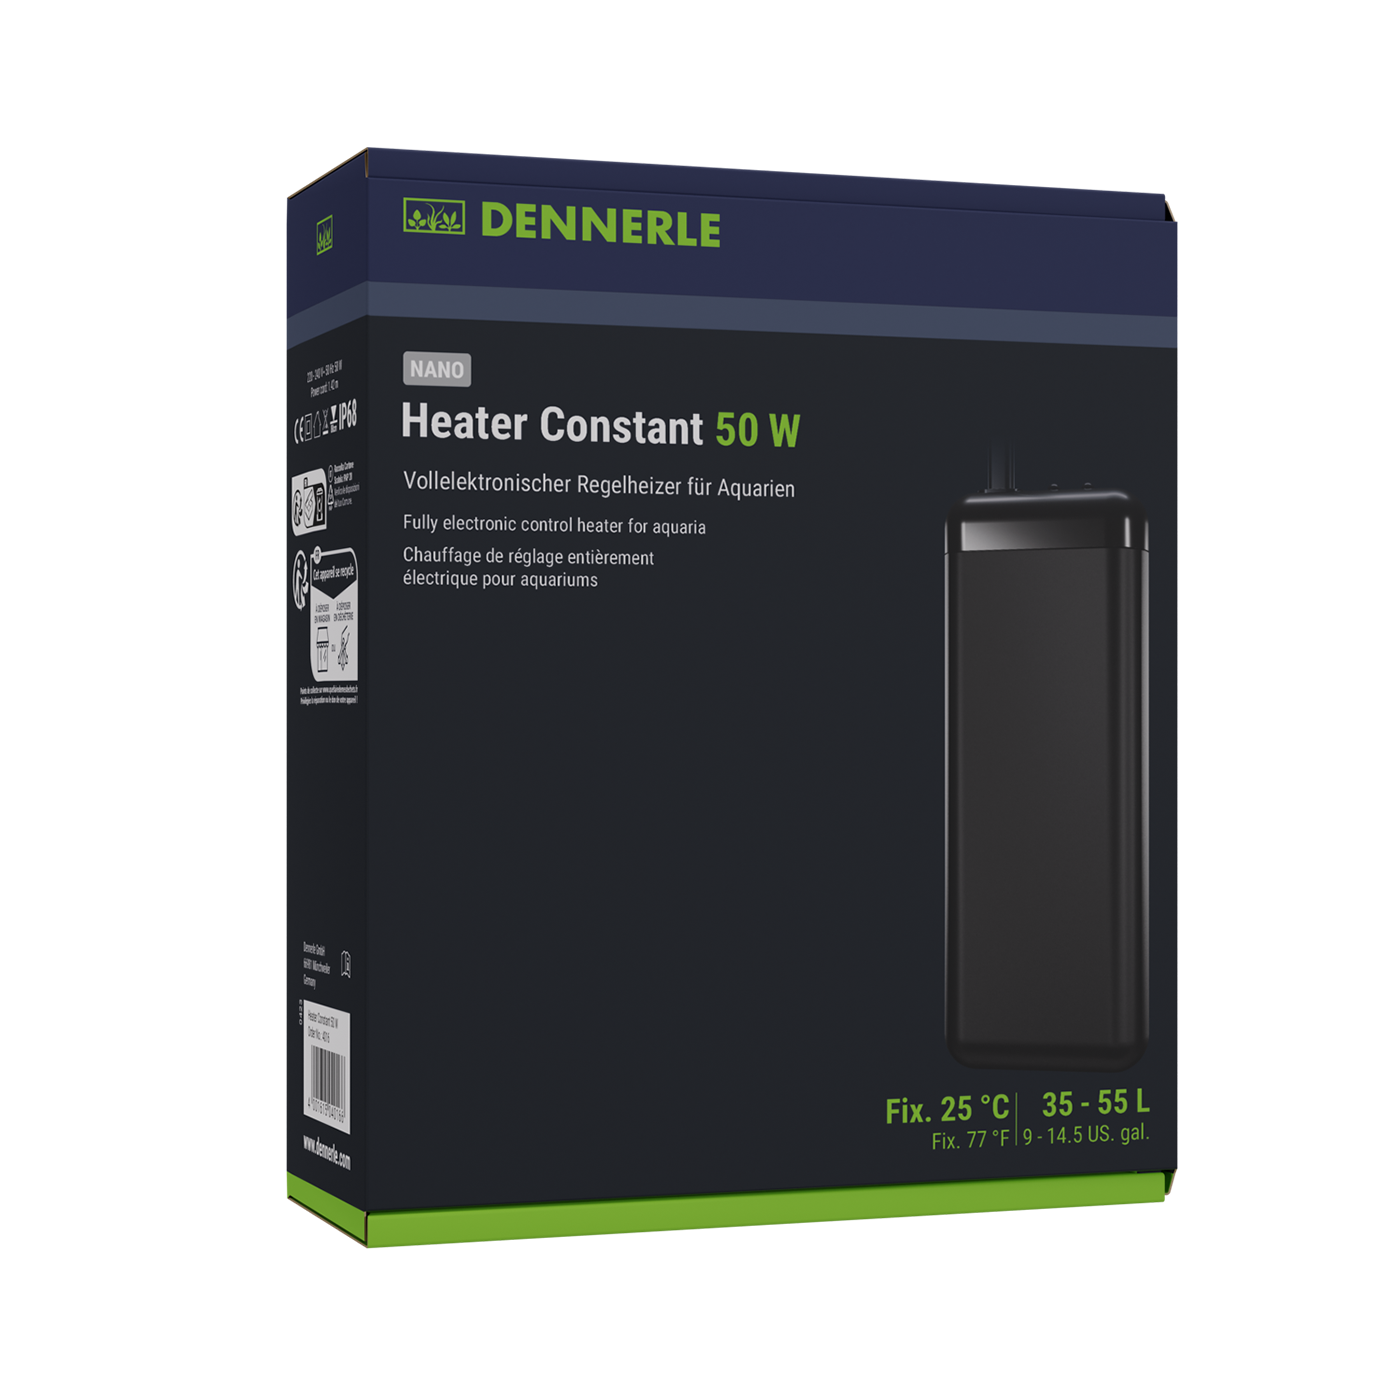 Dennerle heater constant